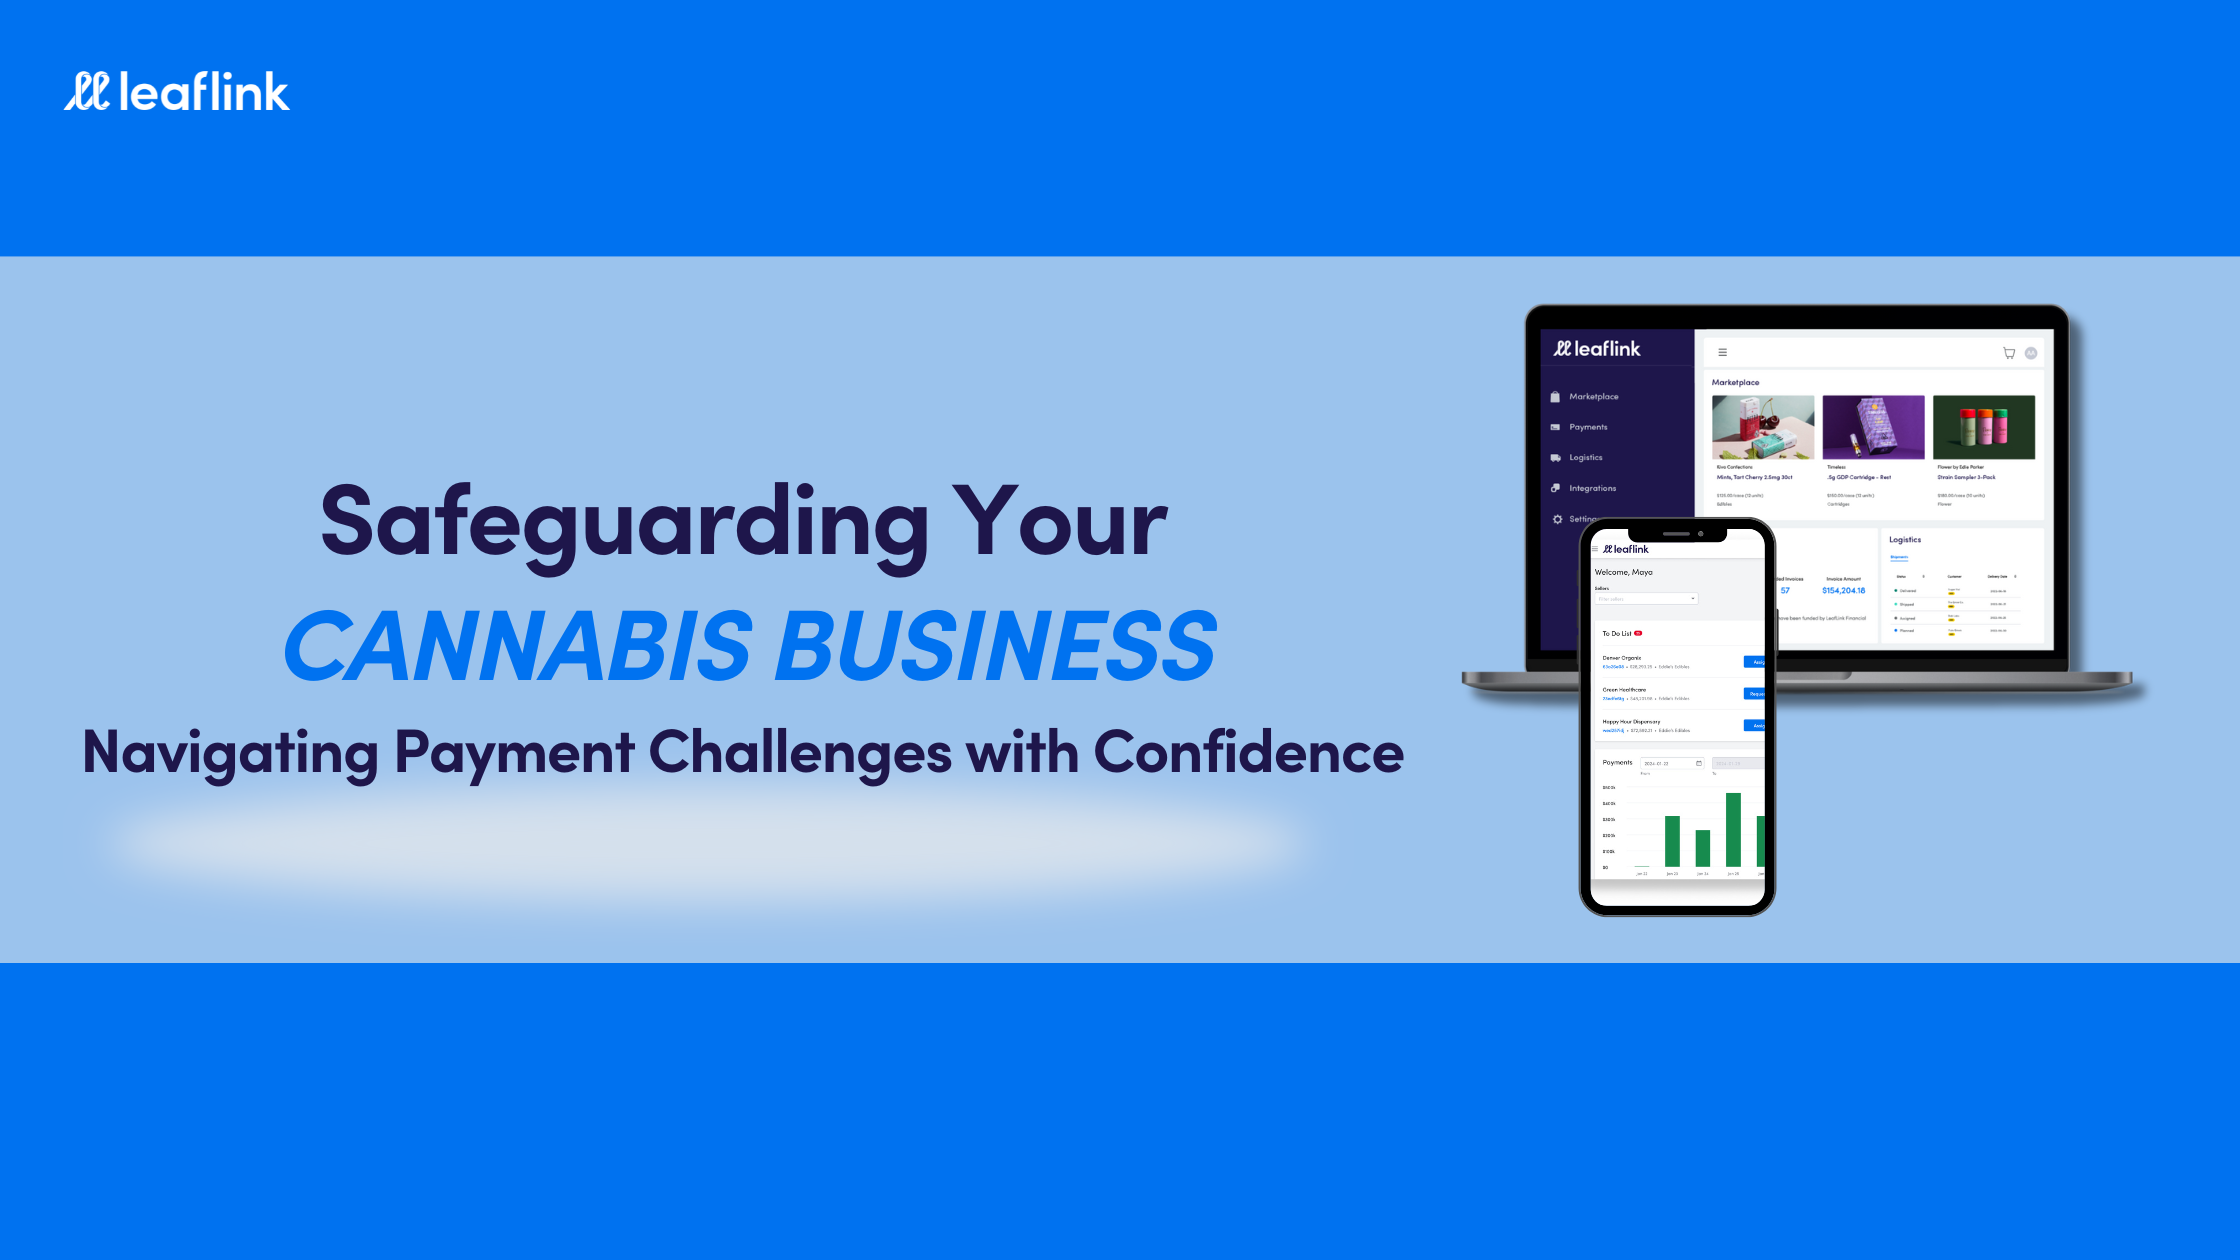 Safeguarding Your Cannabis Business: Navigating Payment Challenges with Confidence